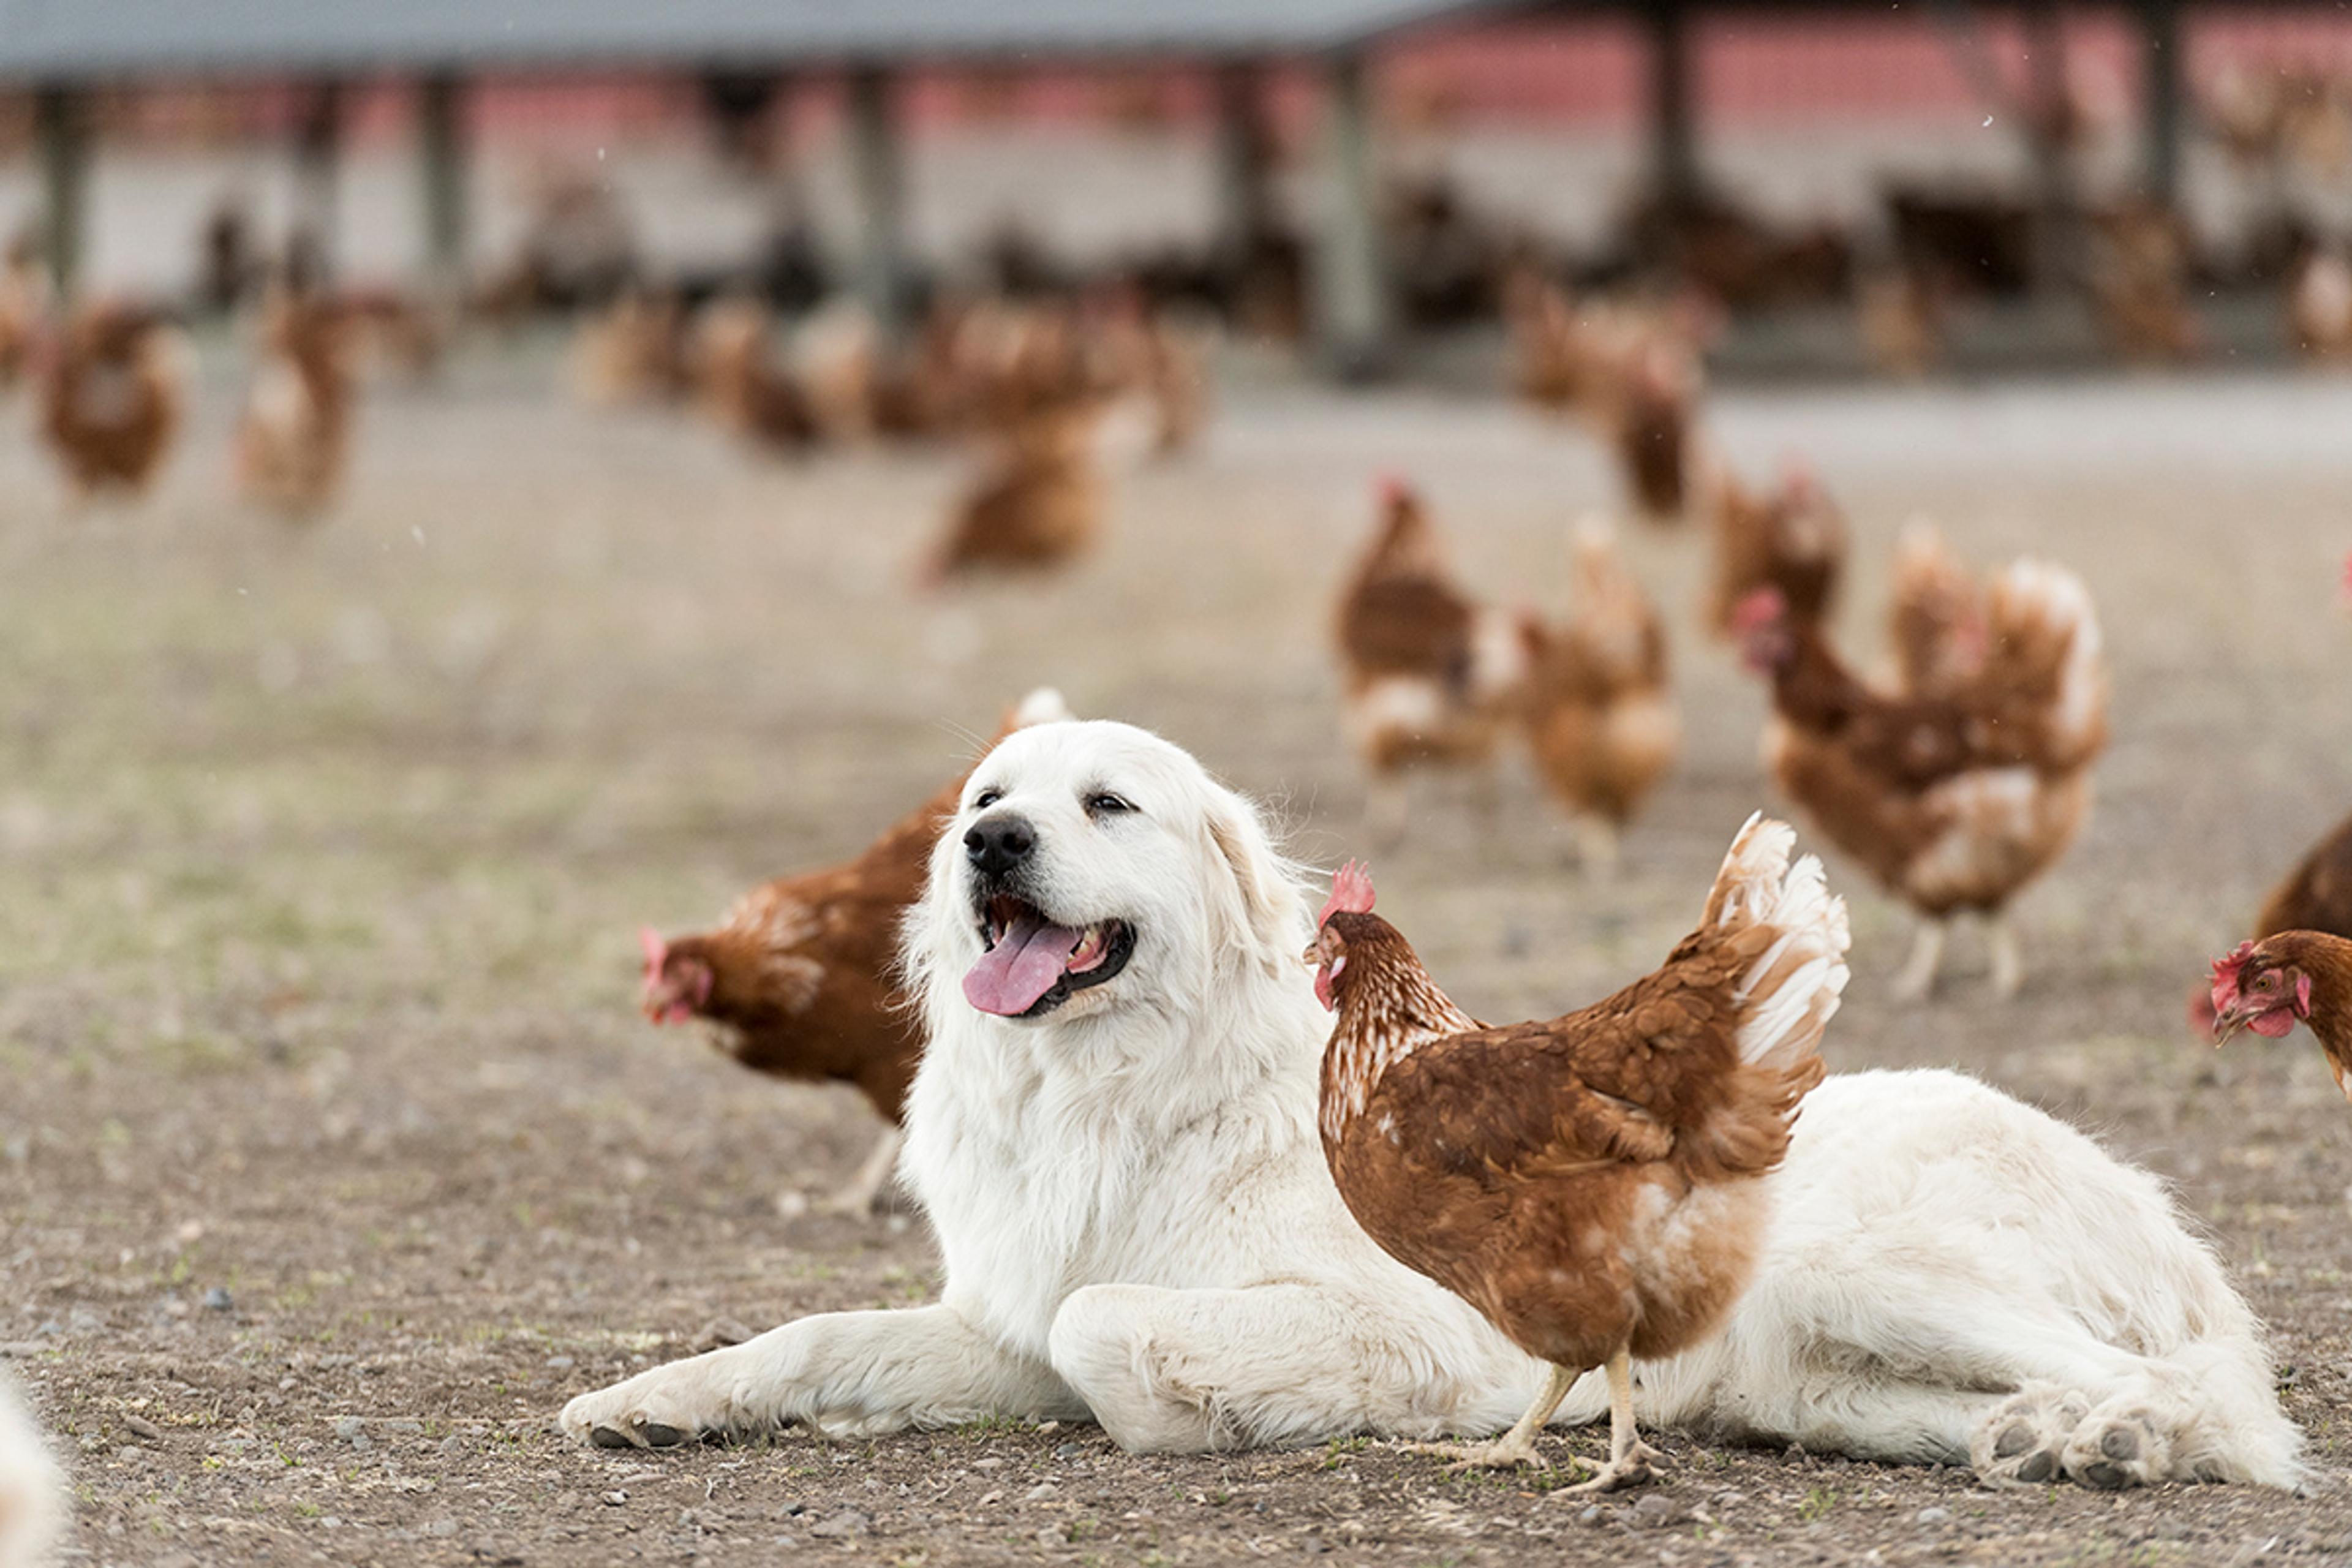 A white Great Pyrenees dog lays in a yard with brown chickens scattered around it.